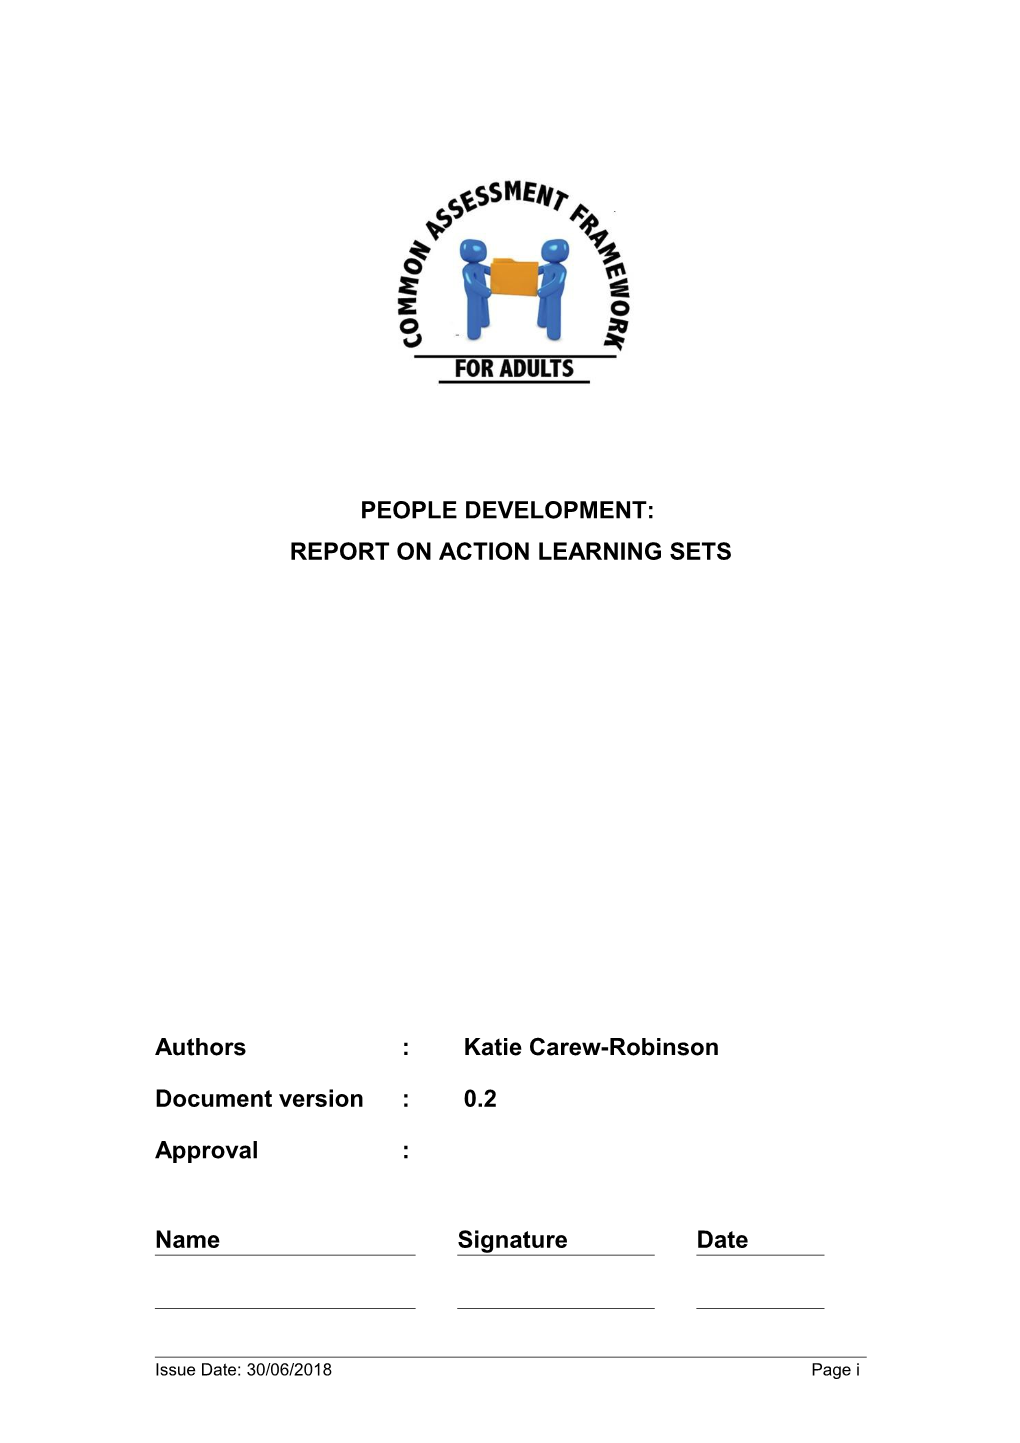 Report on Action Learning Sets